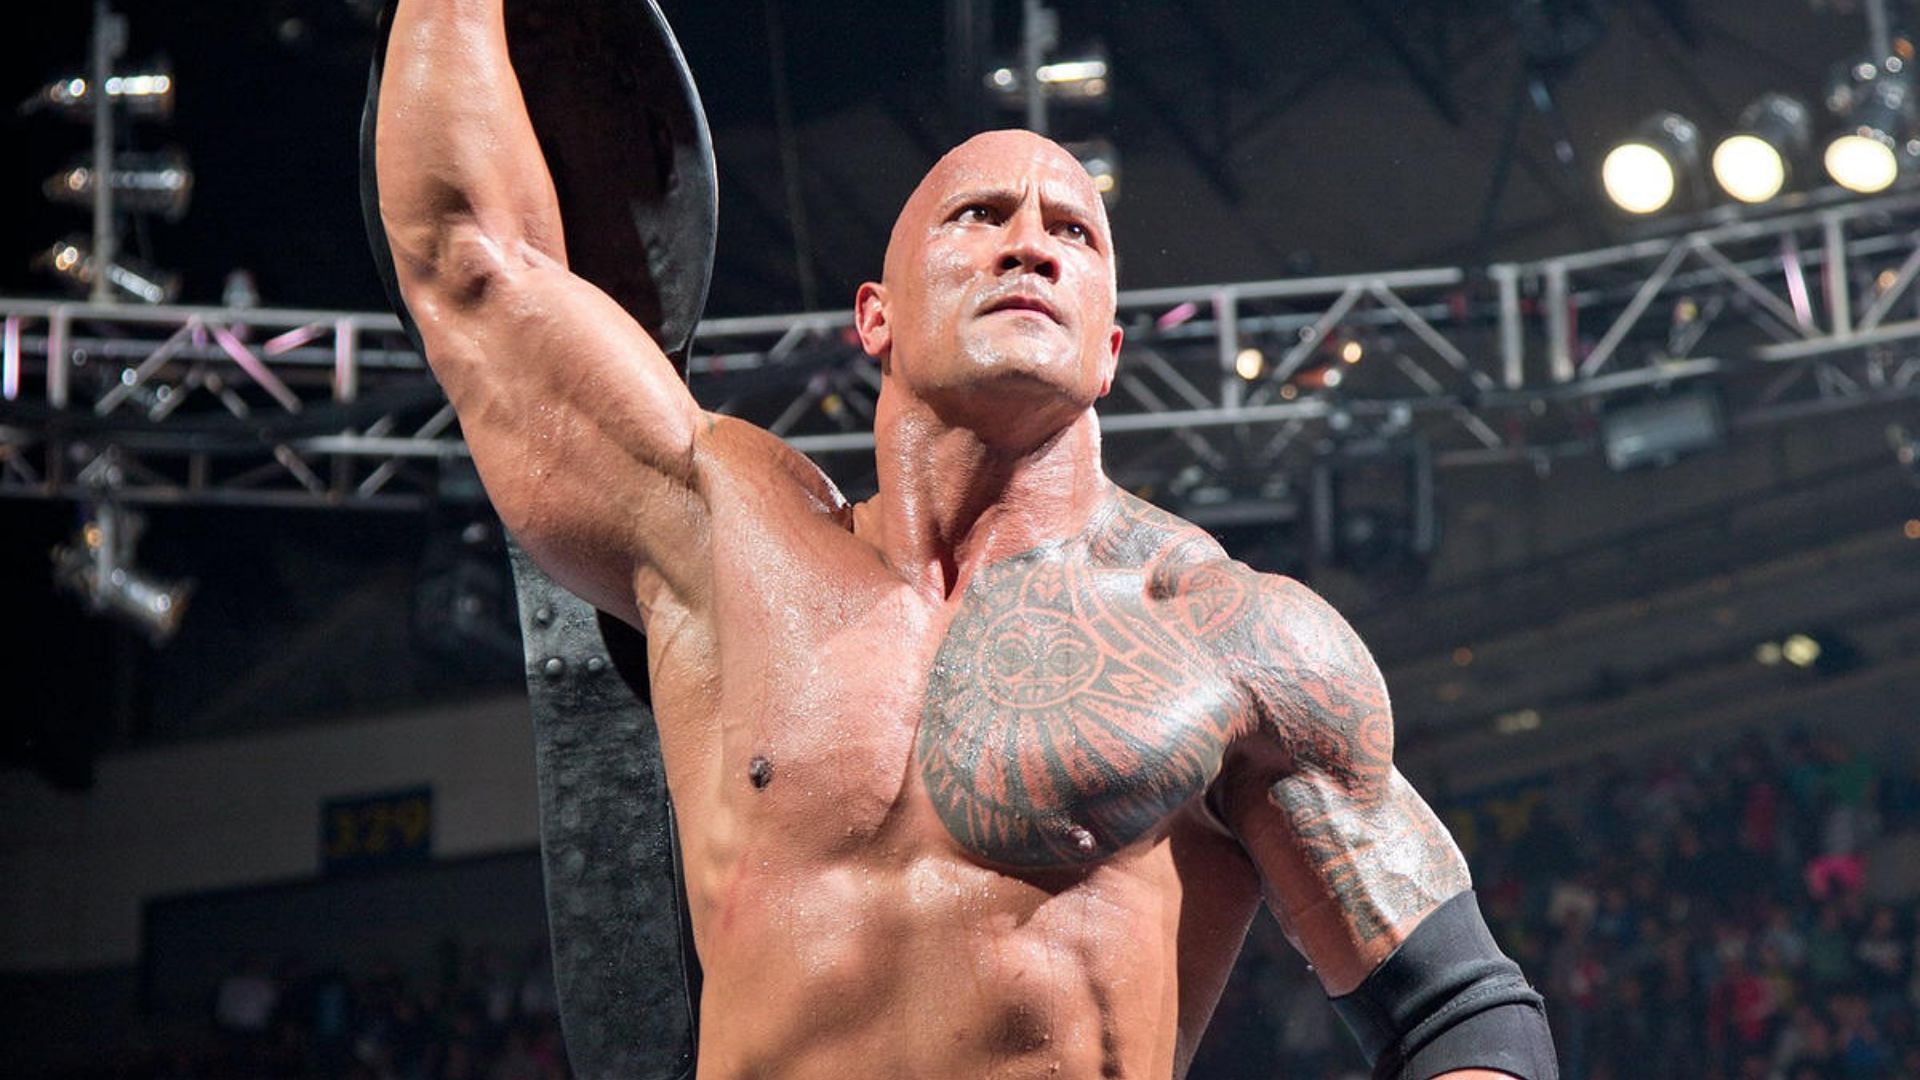 The Rock is back in the house of World Wrestling Entertainment